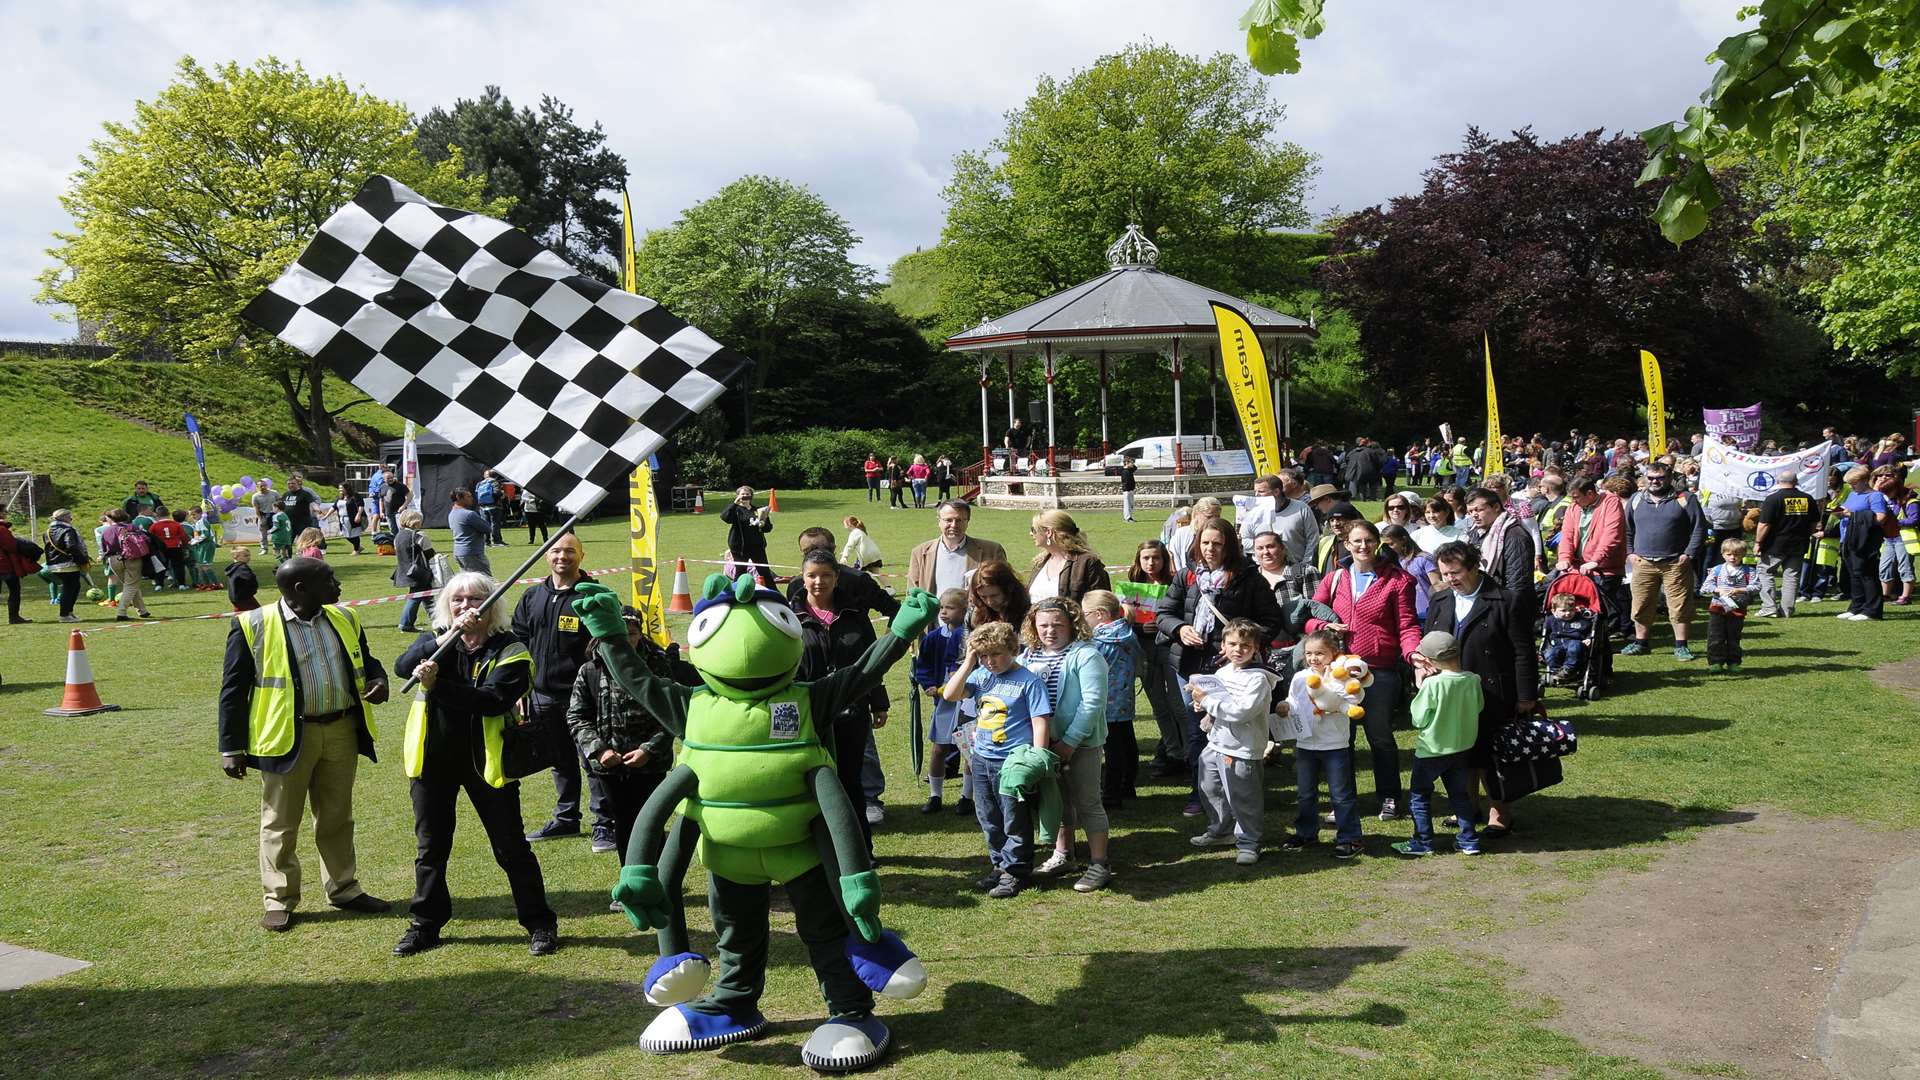 The record breaking walking bus sets off from Dane John Gardens, Canterbury led by mascot Buster and KM Charity Team trustees David Akporehe and Gill Delahunty.